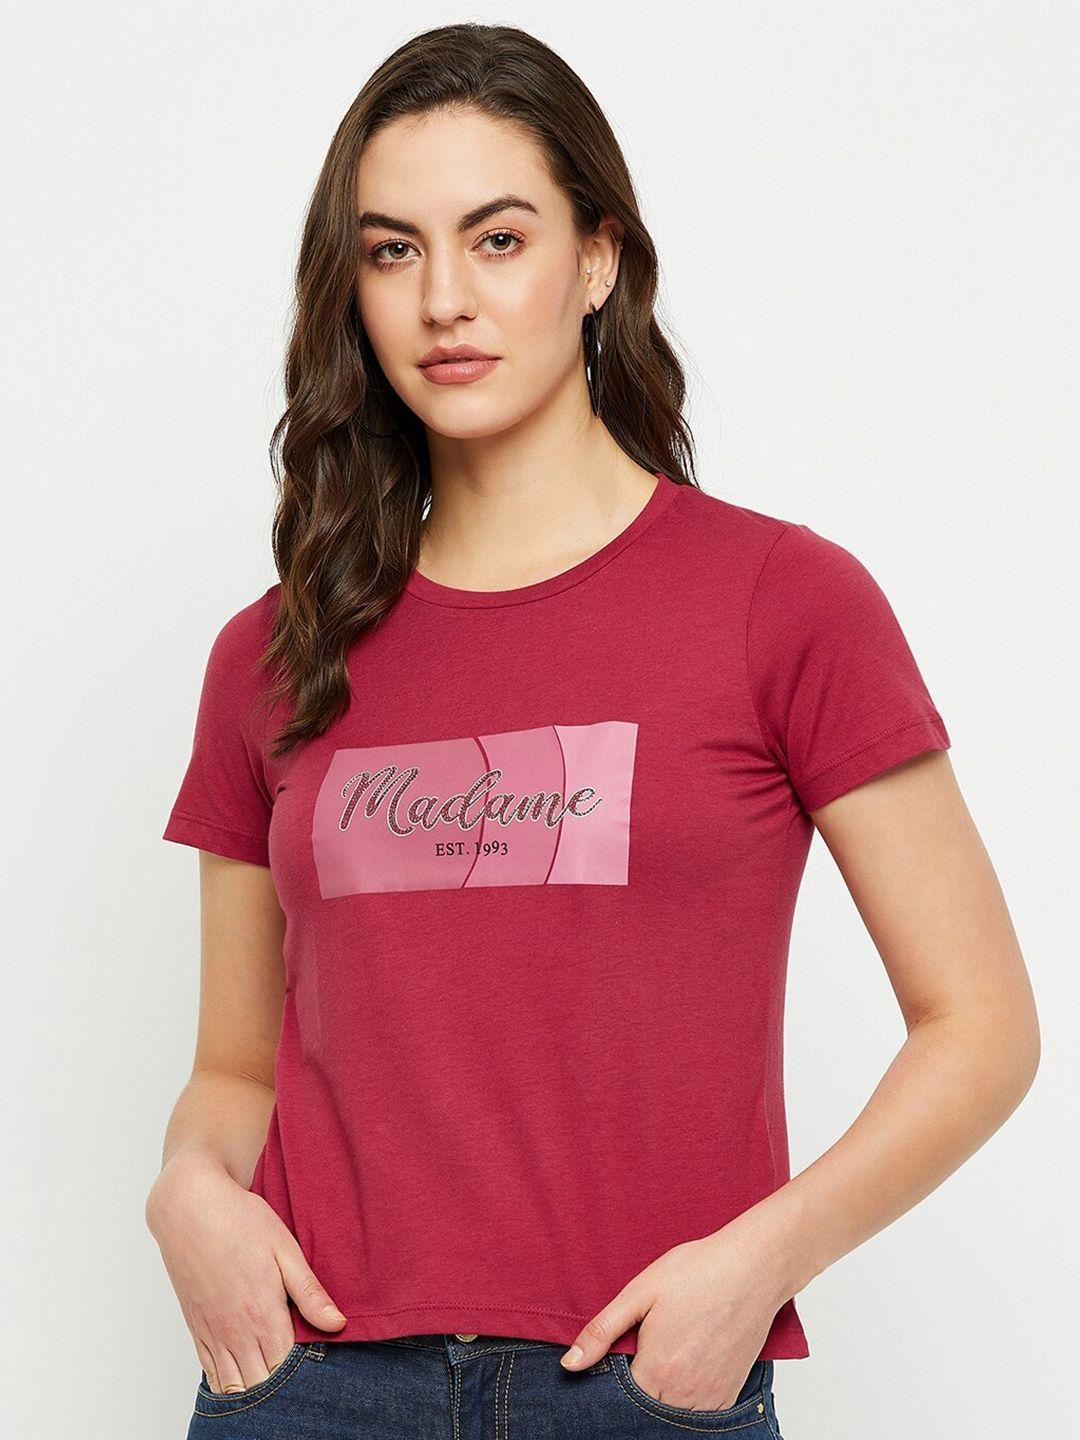 madame brand logo printed cotton styled back top